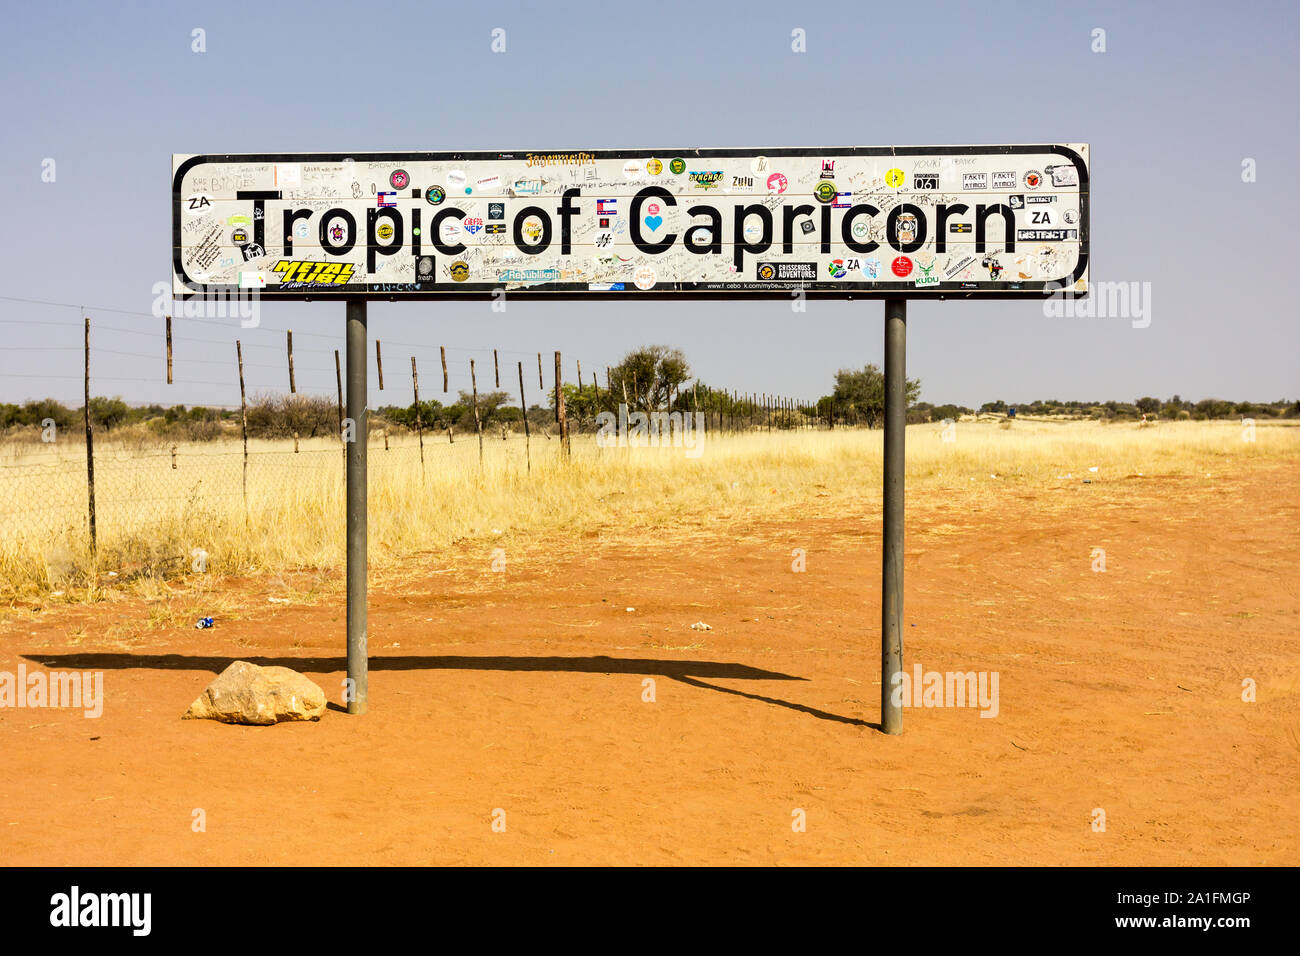 Tropic of Capricorn road sign on a dry and dusty Namibian desert road in Winter with no people Stock Photo